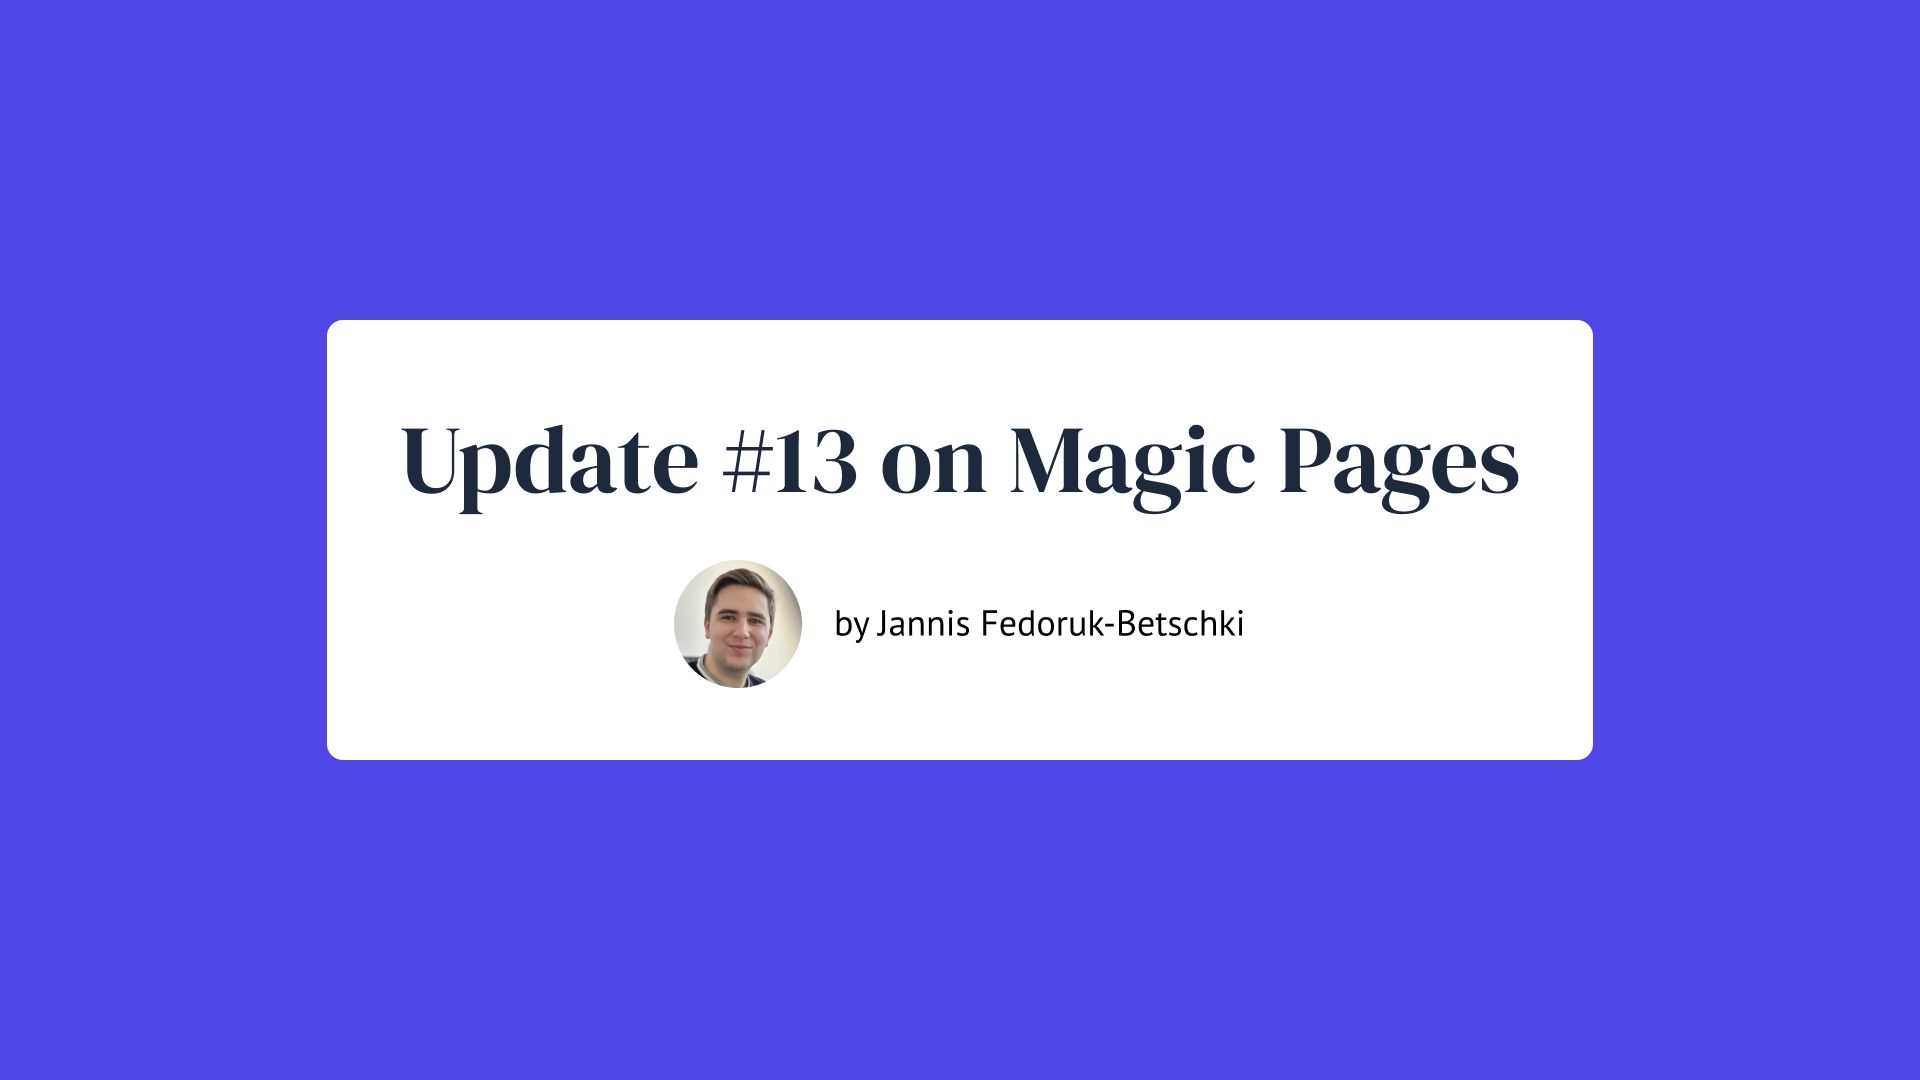 Update #13 on Magic Pages by Jannis Fedoruk-Betschki